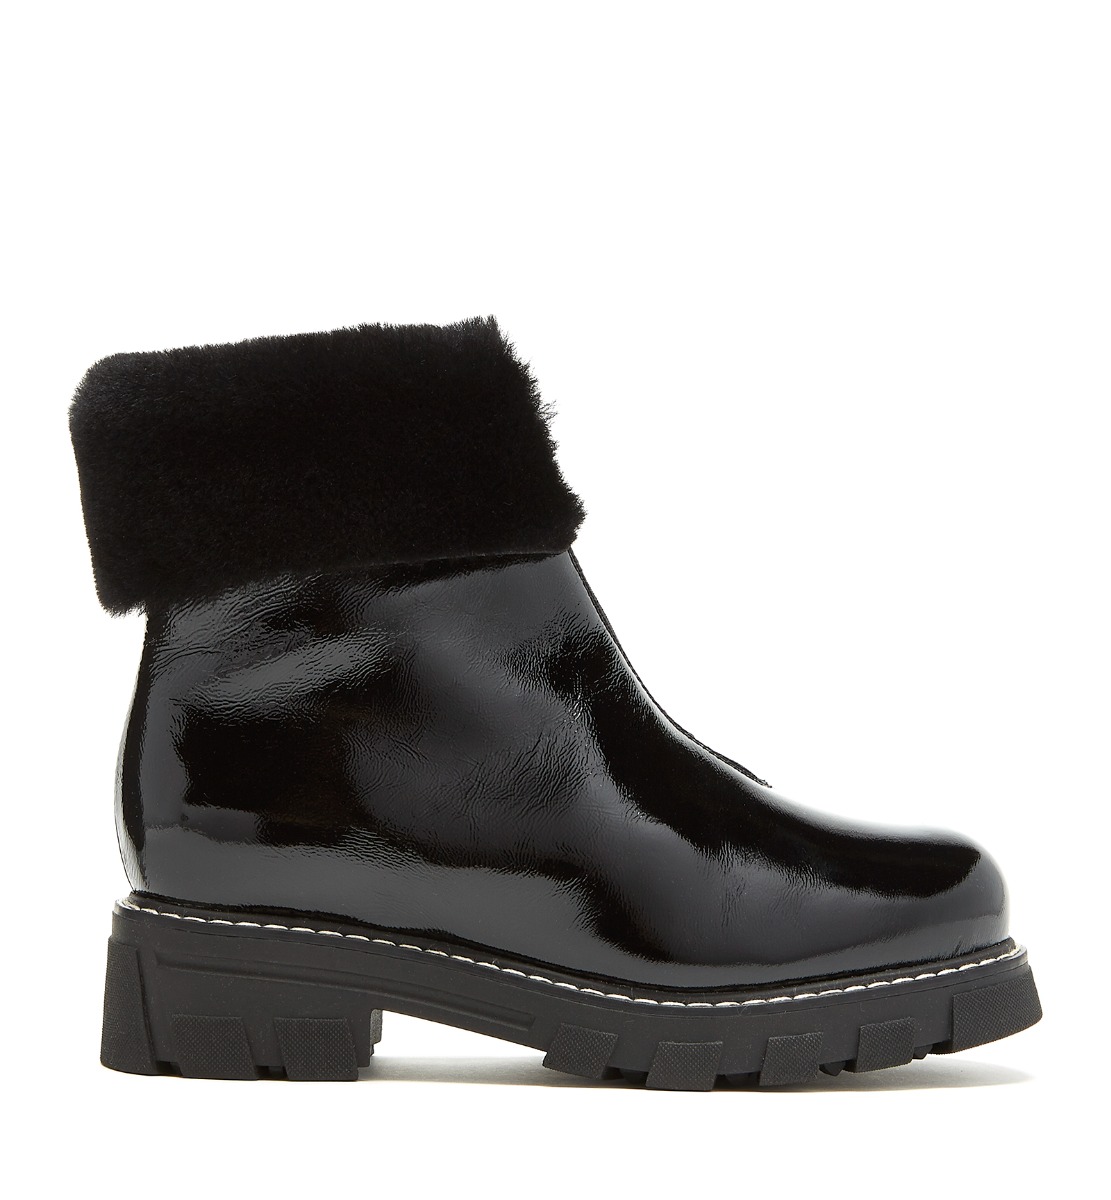 La Canadienne Abba X You Shearling Lined Bootie In Black Crinkle Leather